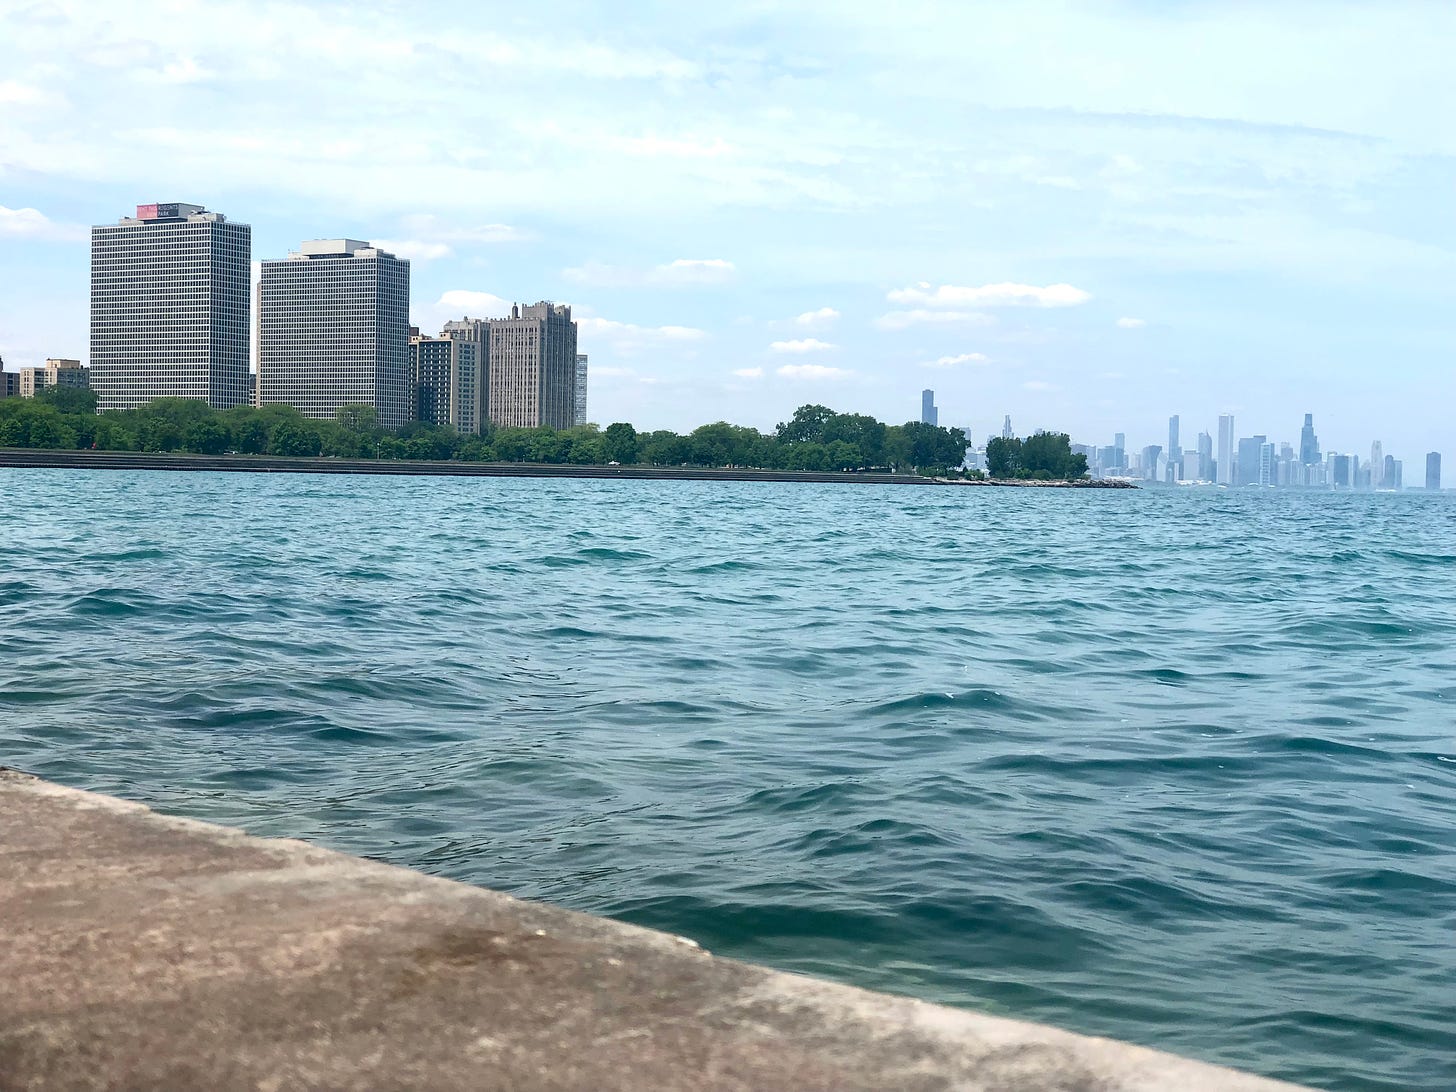 Lakefront shot from Promontory Point in Chicago with downtown in the distance.